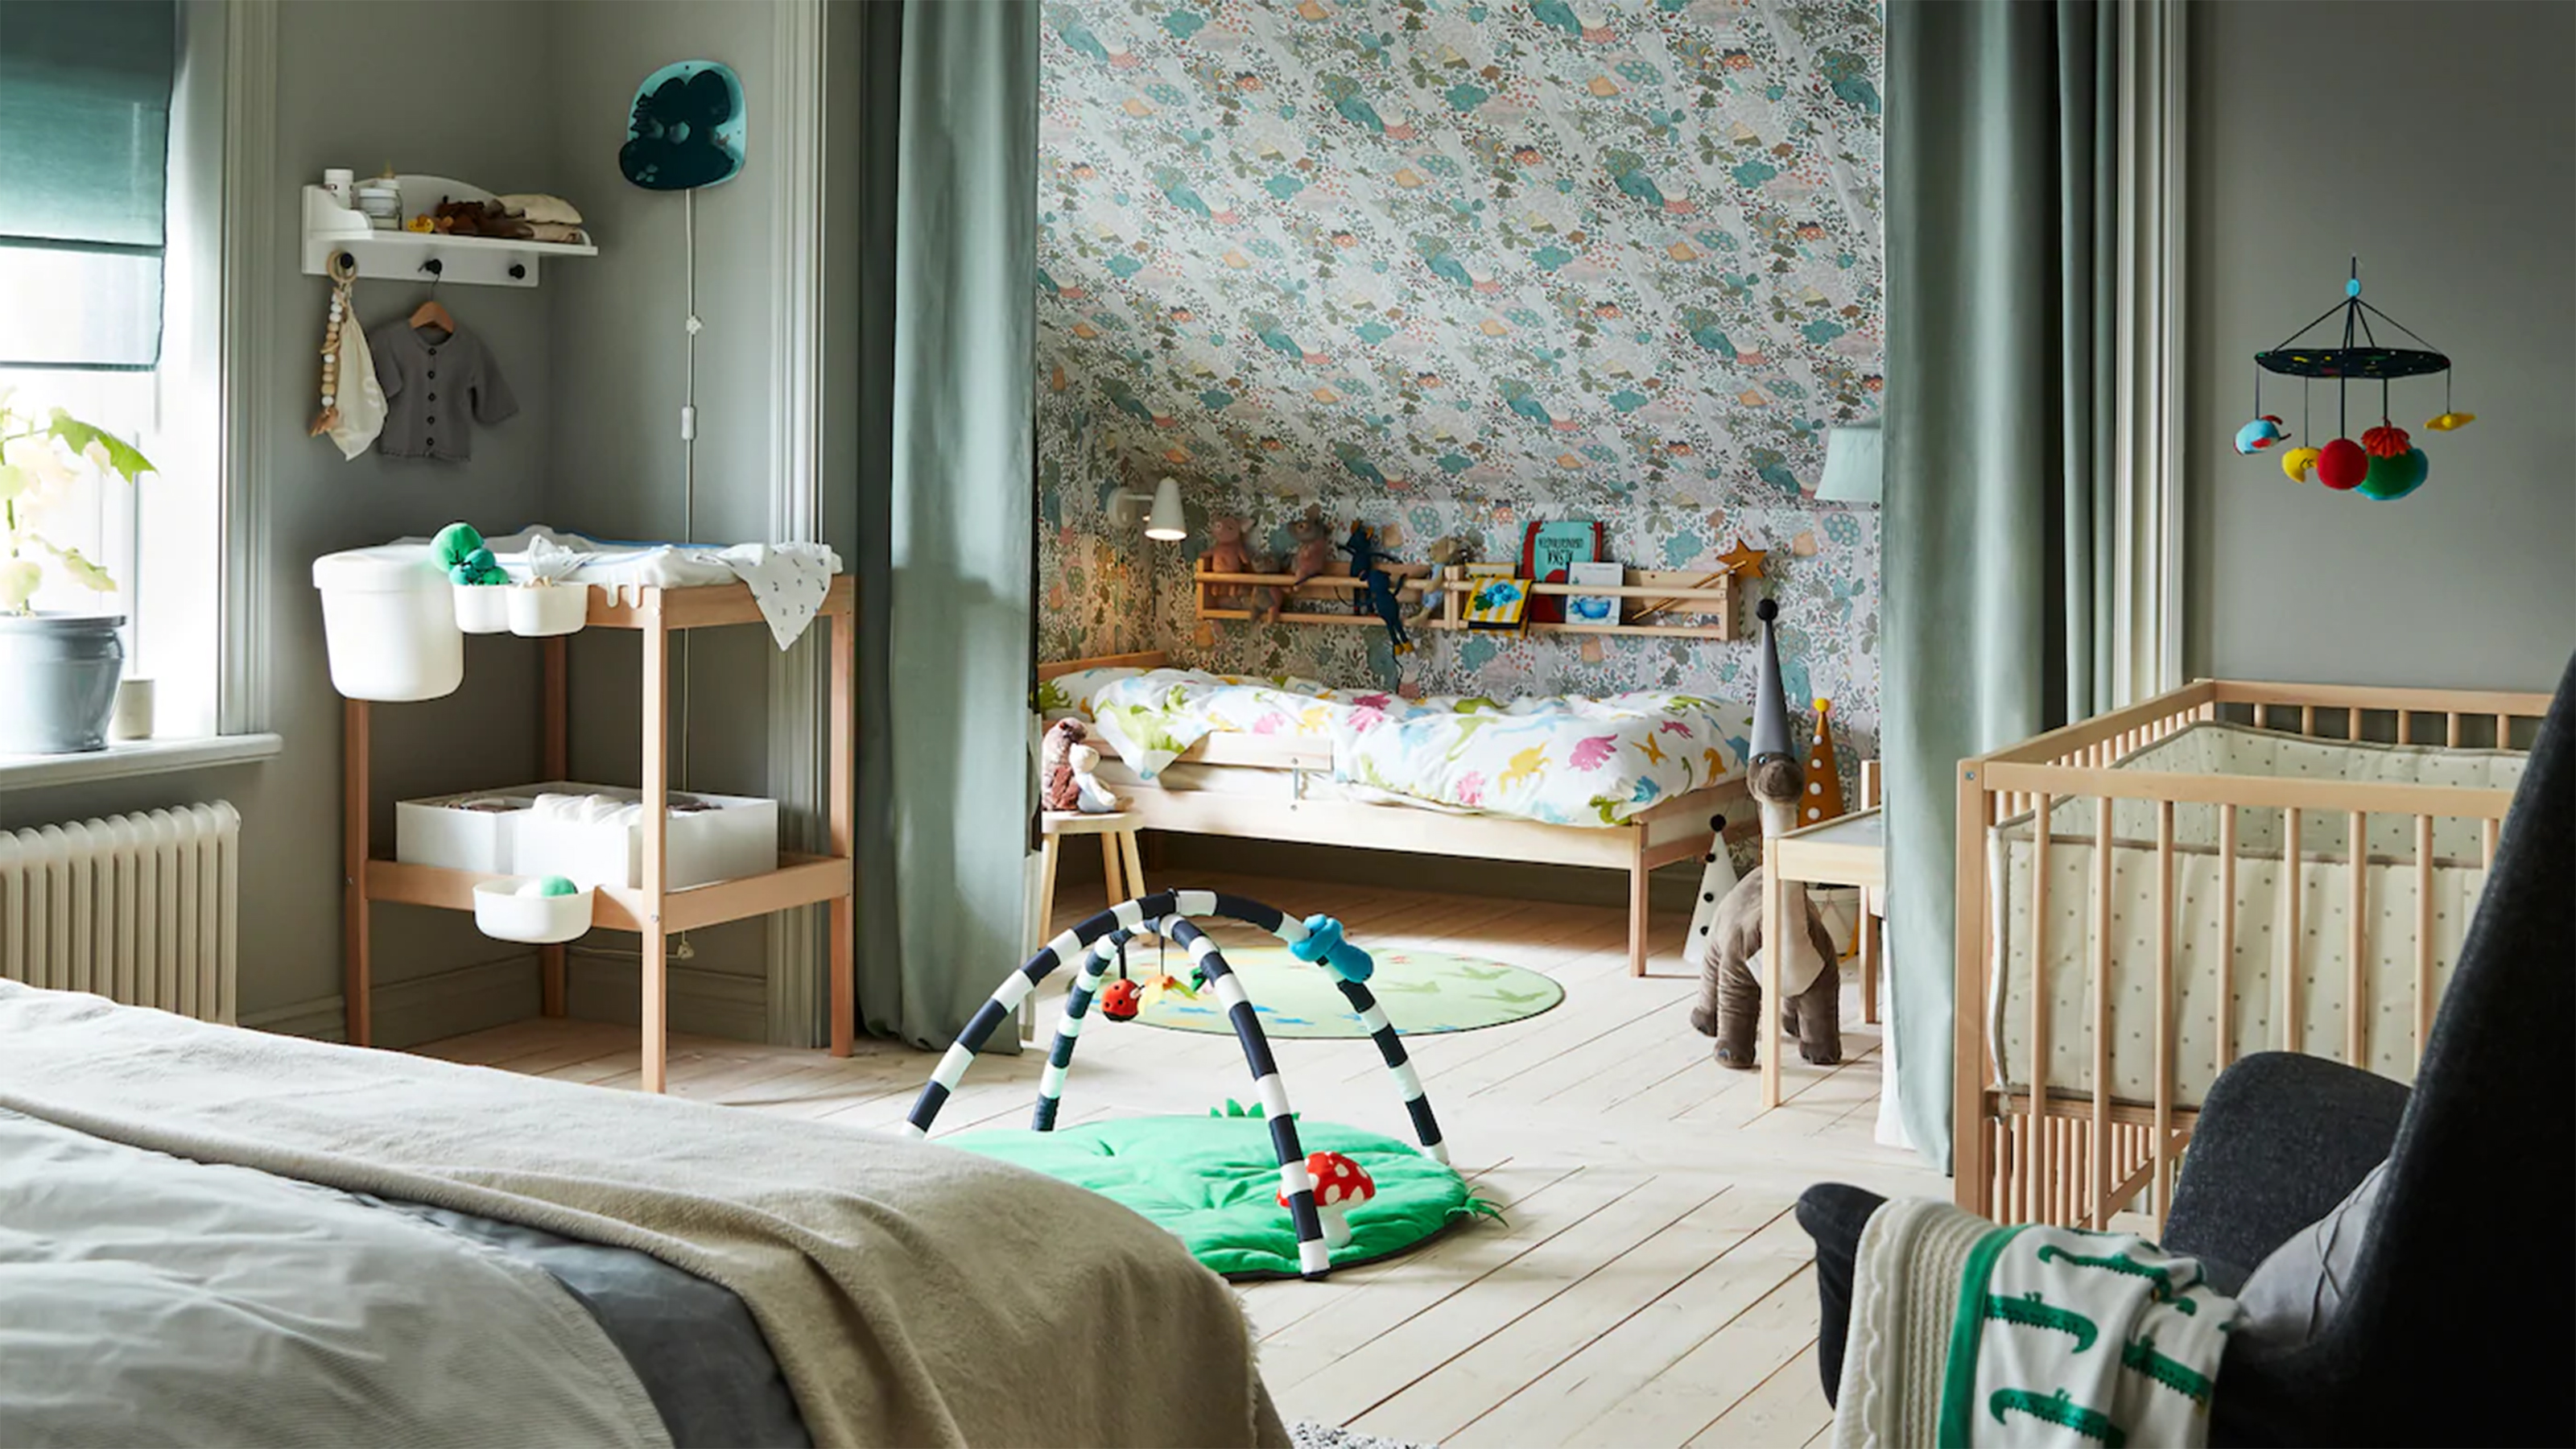 13 shared bedroom ideas: how to divide a shared kids room | Real Homes